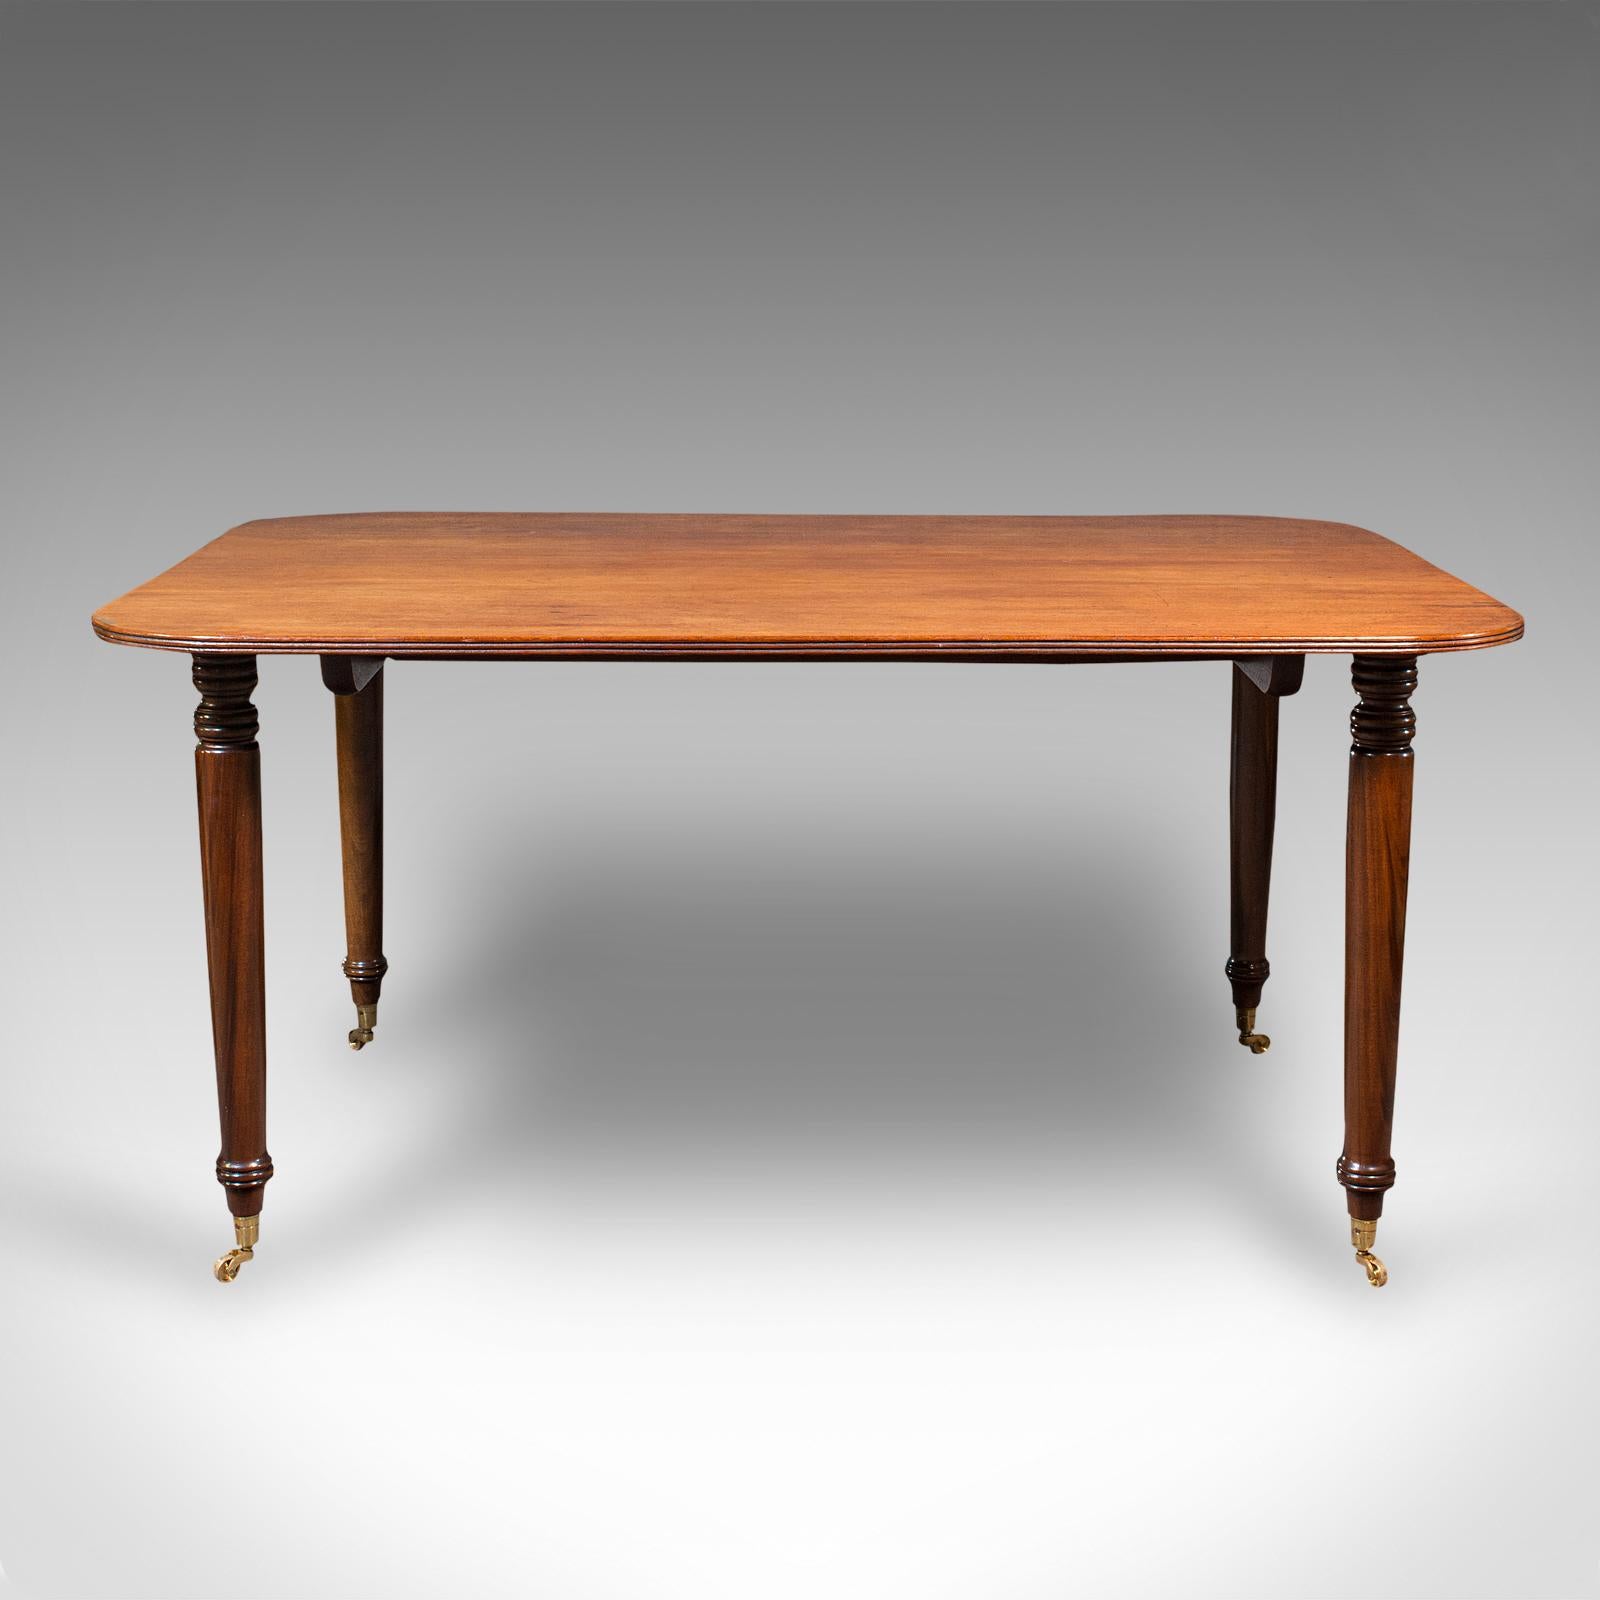 British Antique Breakfast Table, English, 4-6 Seat, Dining Table, Victorian, Circa 1900